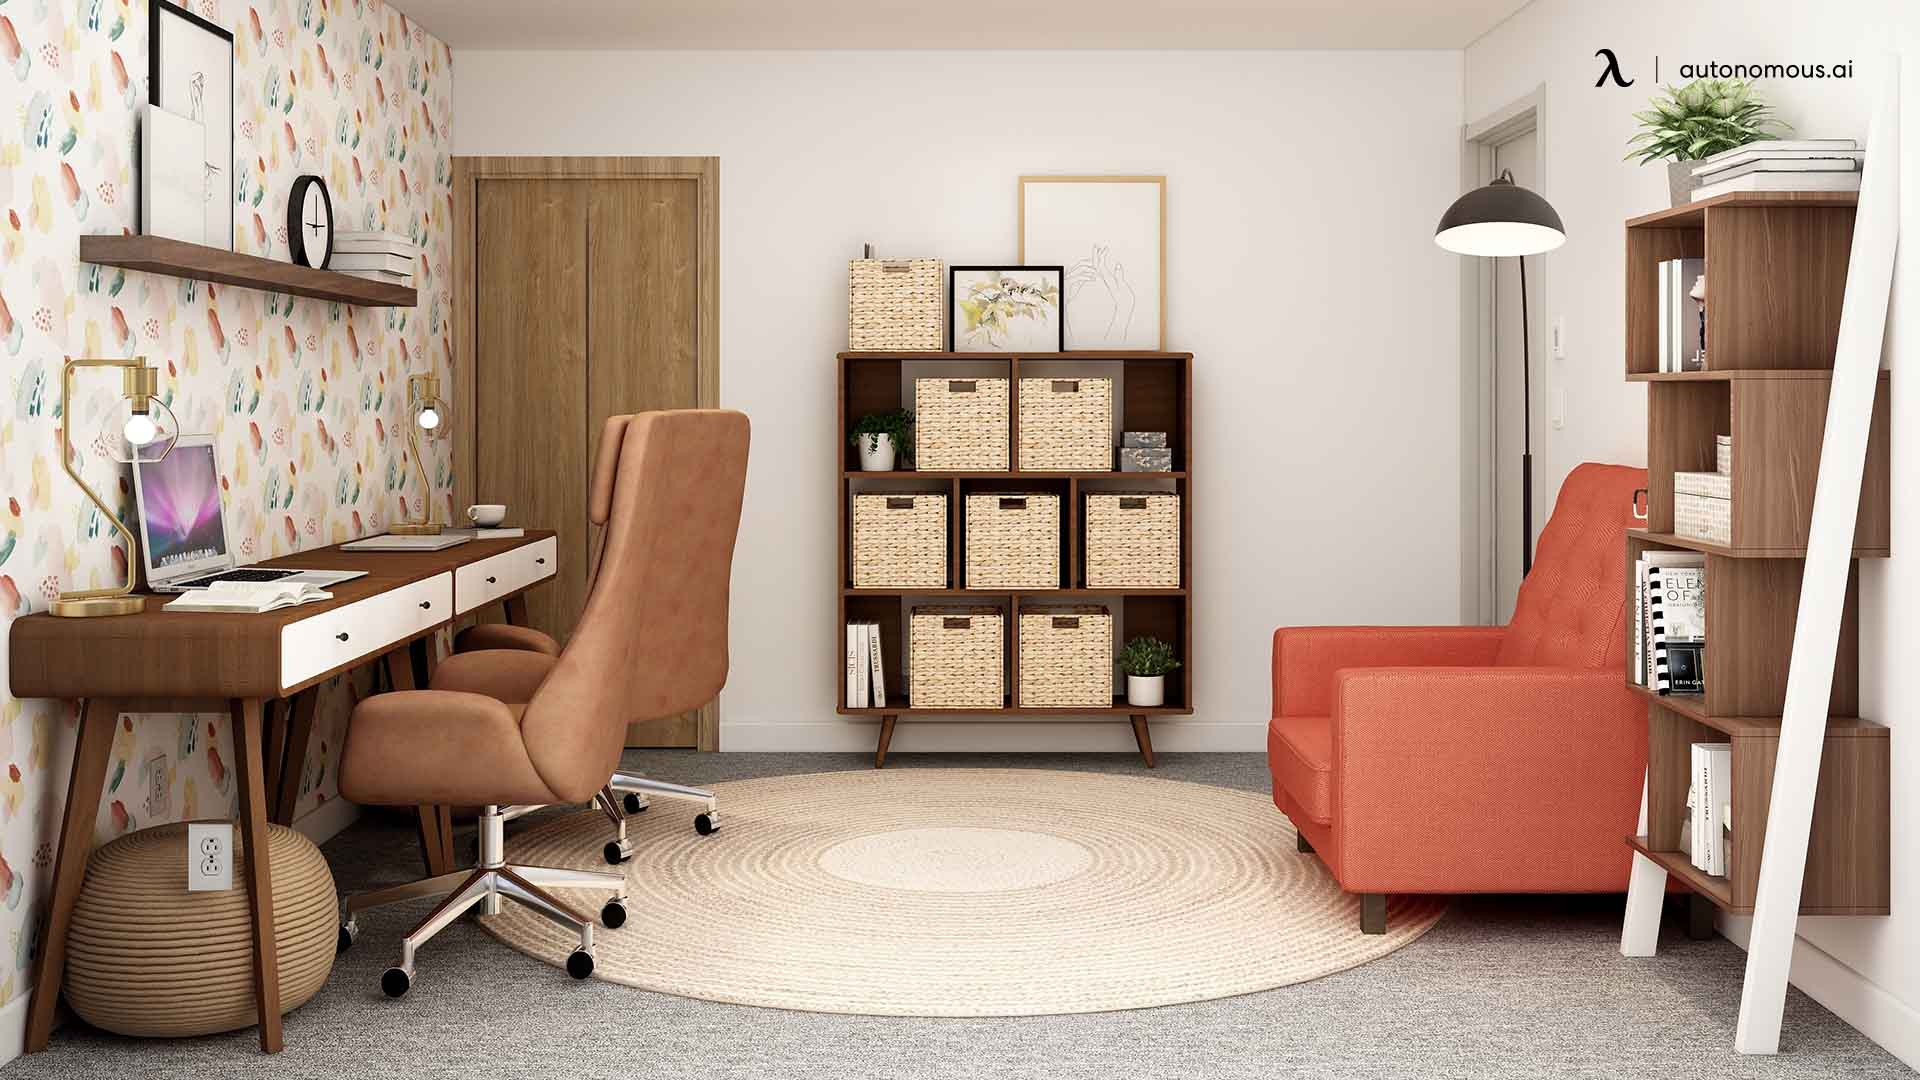 How to Arrange Your Own Private Workspace in the Corner of the Room